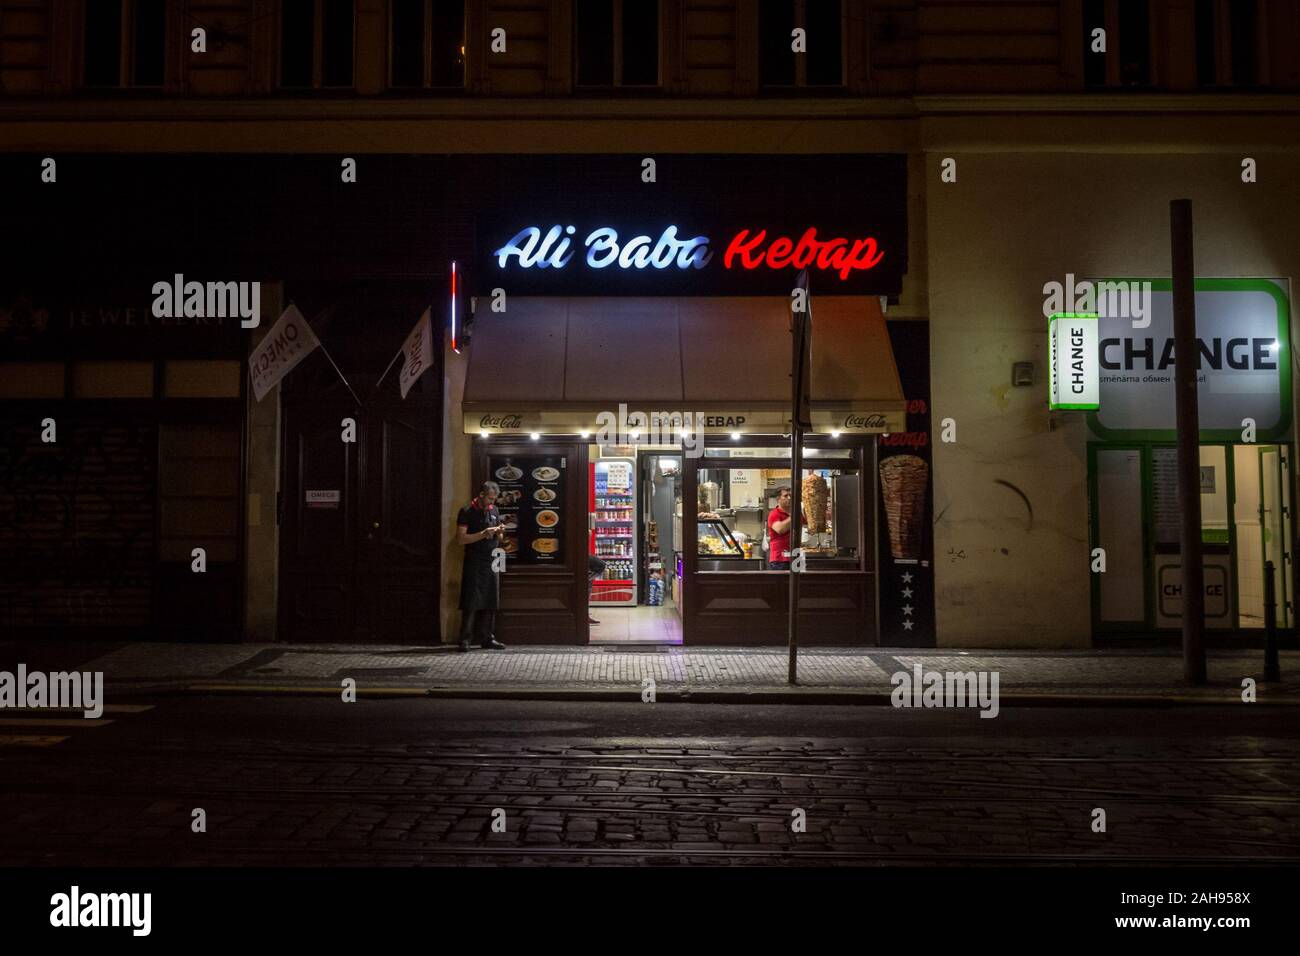 PRAGUE, CZECHIA - NOVEMBER 2, 2019: kebab fast food restaurant at night in the center of Prague. Doner kebap, or gyros, is a typical dish and snak str Stock Photo